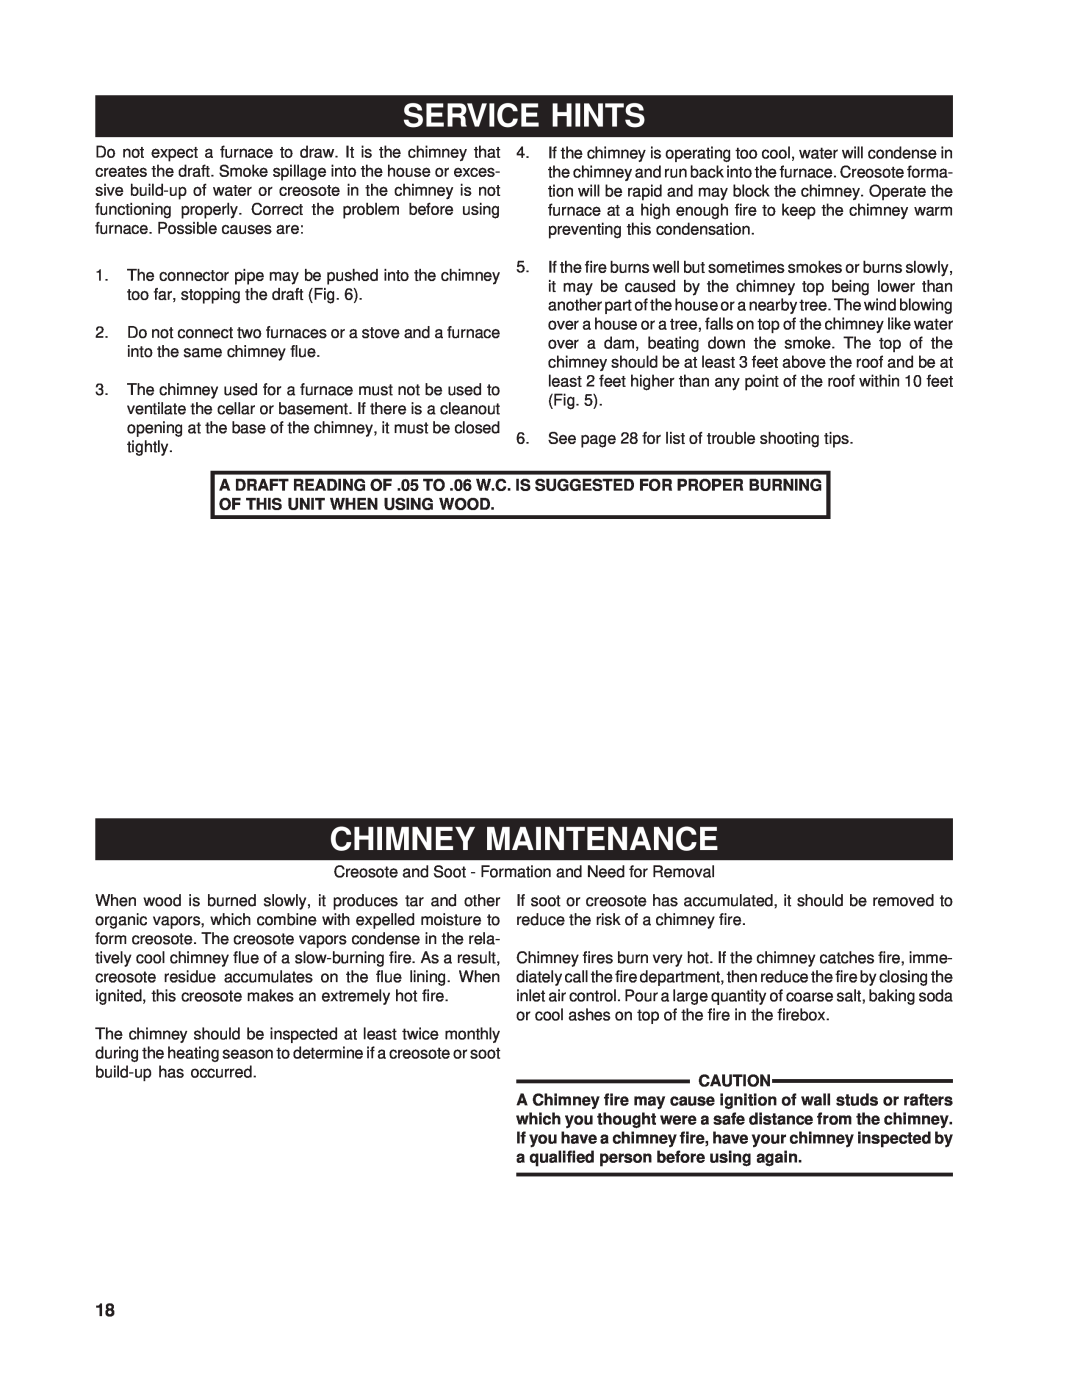 United States Stove 1200Q owner manual Service Hints, Chimney Maintenance 